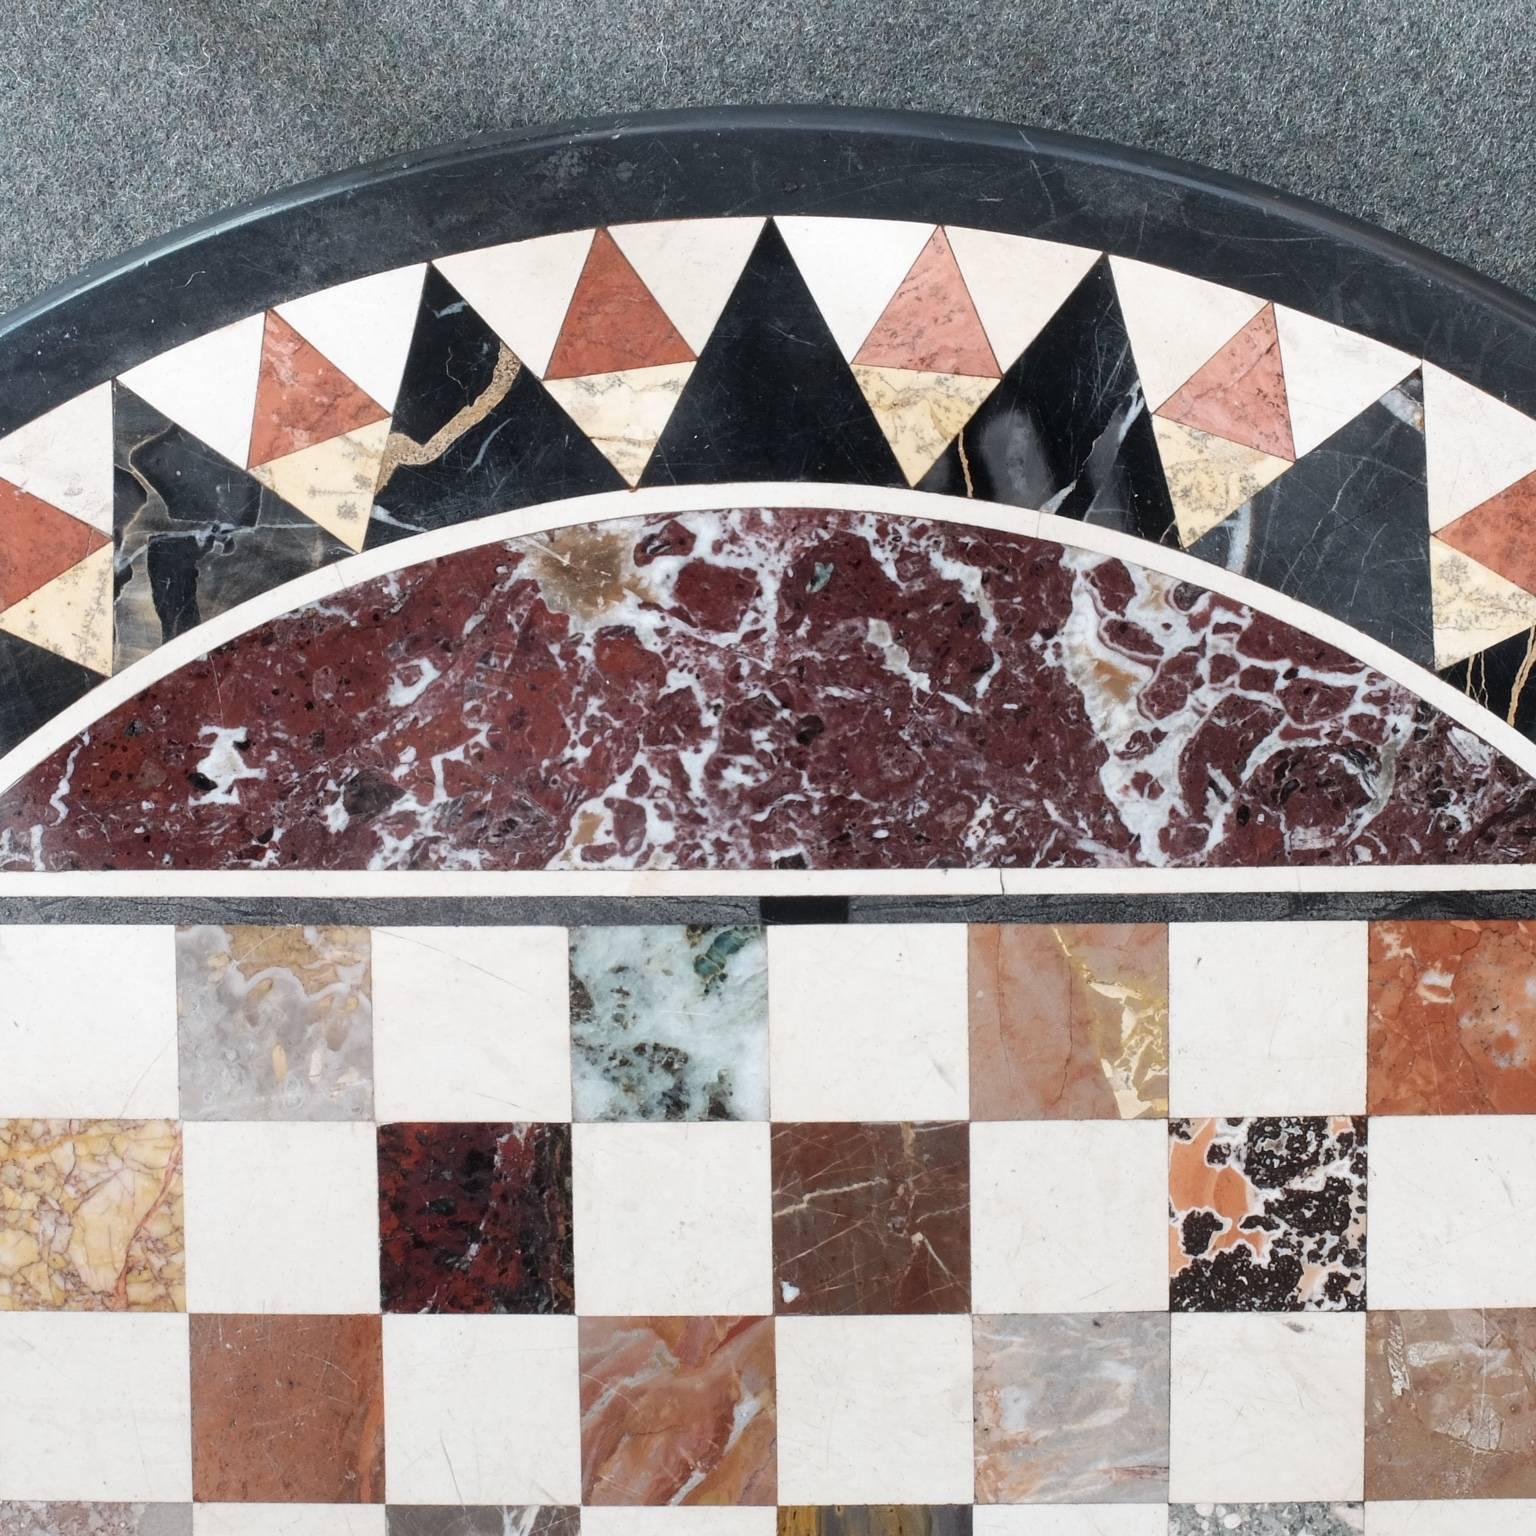 An early 19th century circular tabletop composed of many different colored specimen marbles inlaid into a base of 'black marble'. The black marble base is actually a type of limestone almost exclusively quarried in Derbyshire, England (Ashford black